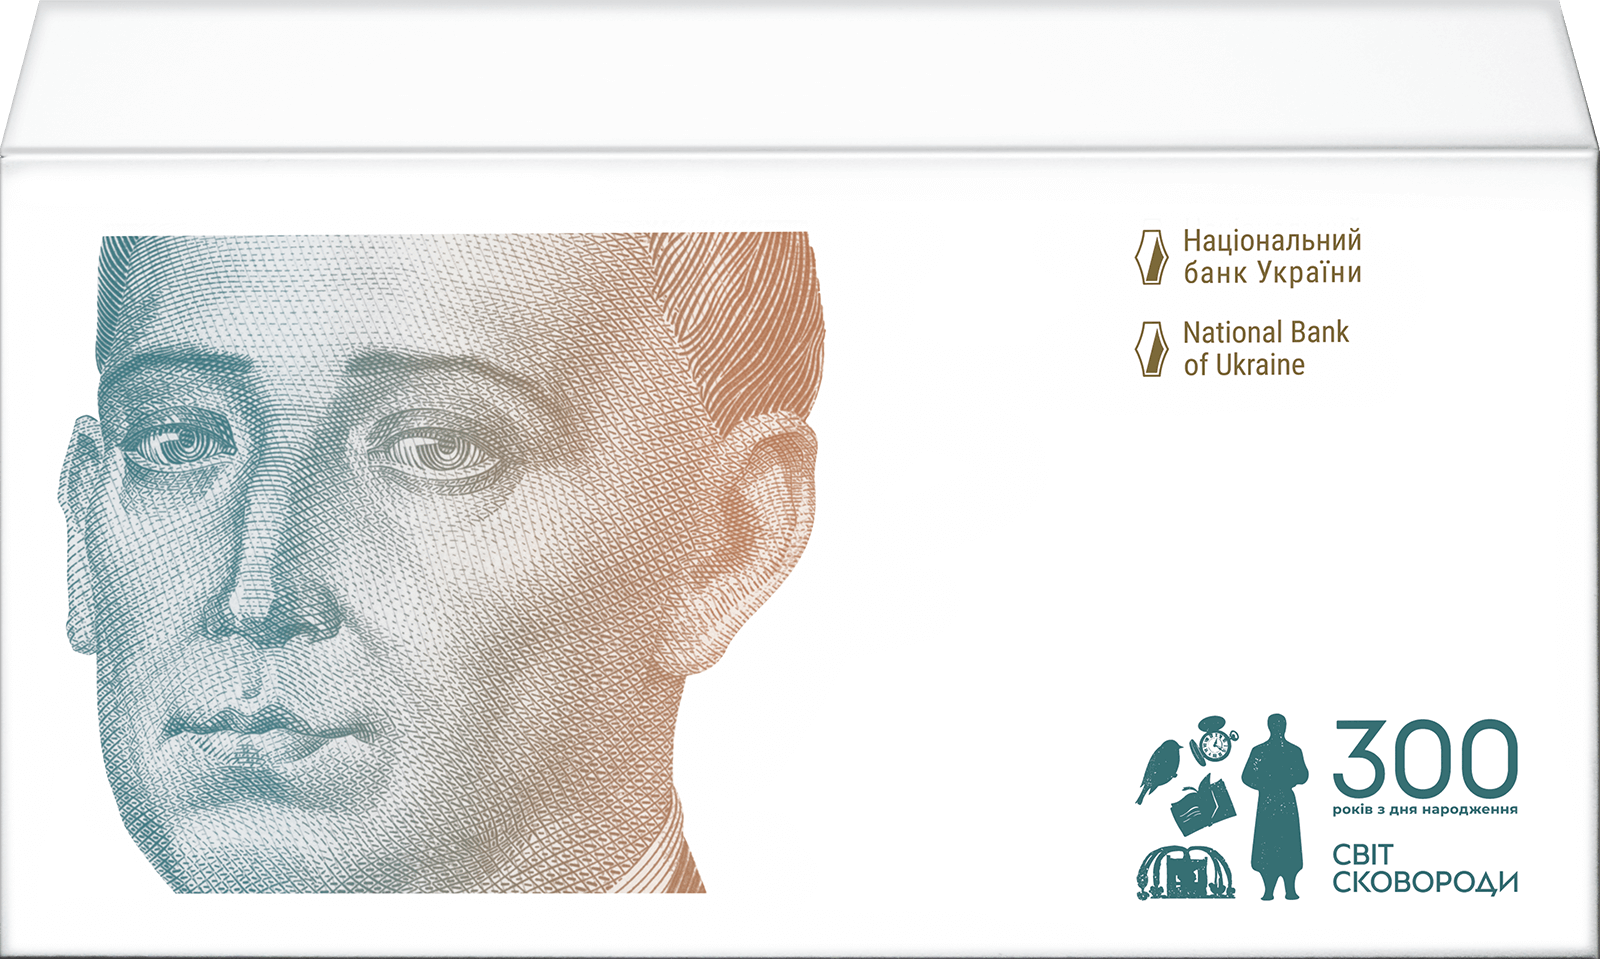 Banknote (in an envelope) replicating the 500 hryvnia banknote designed in 2015 and commemorating the 300th anniversary of the birth of Hryhorii Skovoroda (reverse)